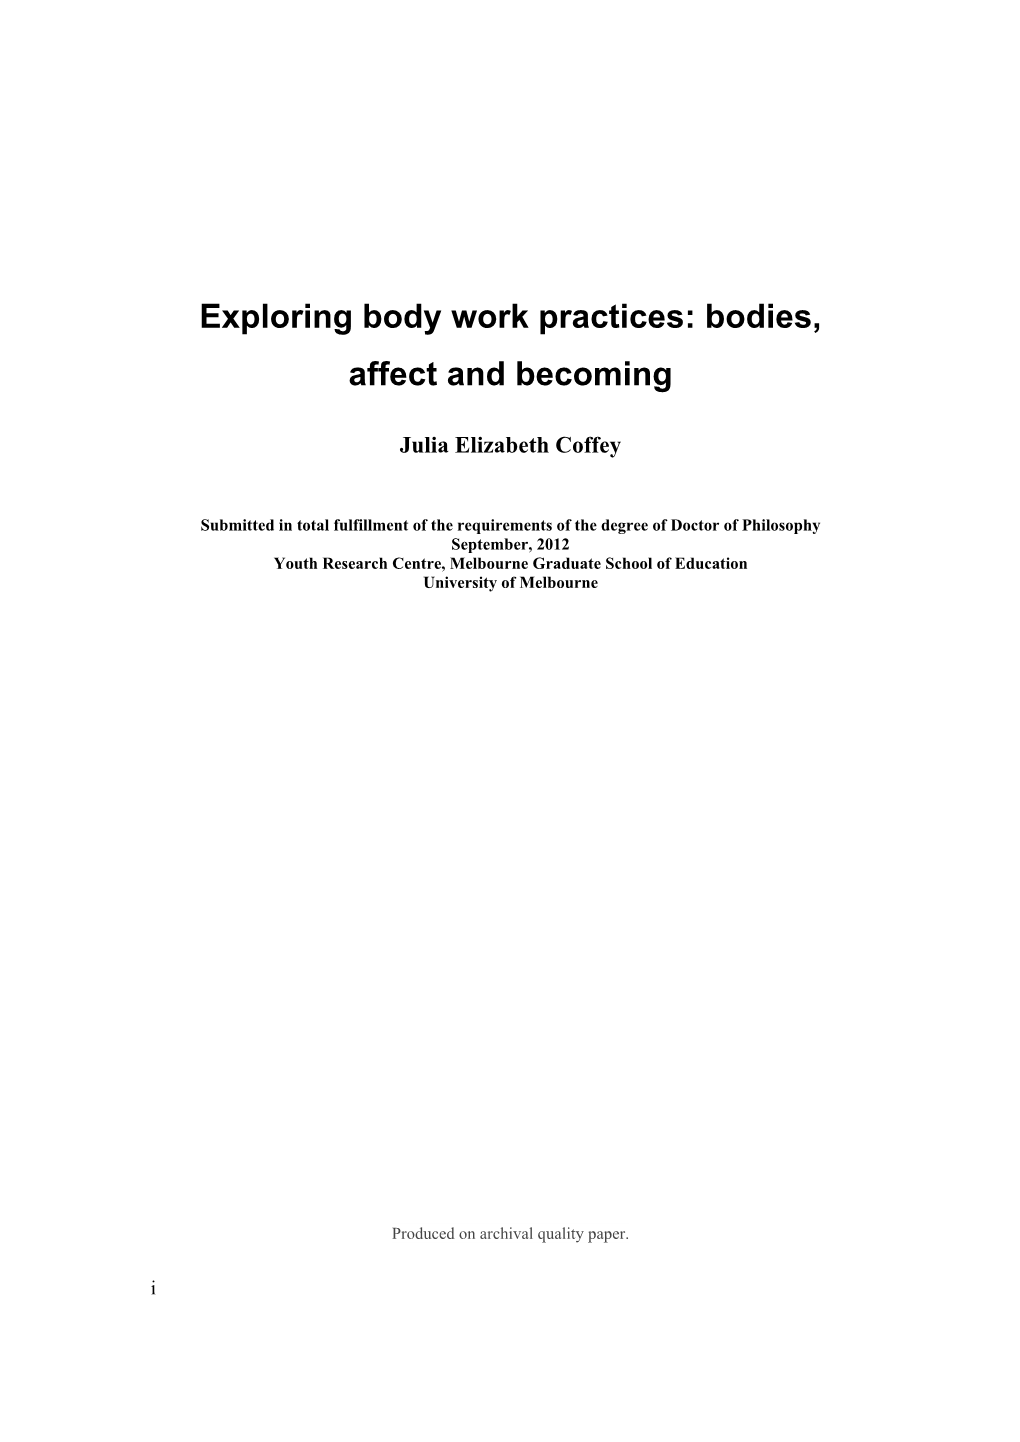 Exploring Body Work Practices: Bodies, Affect and Becoming